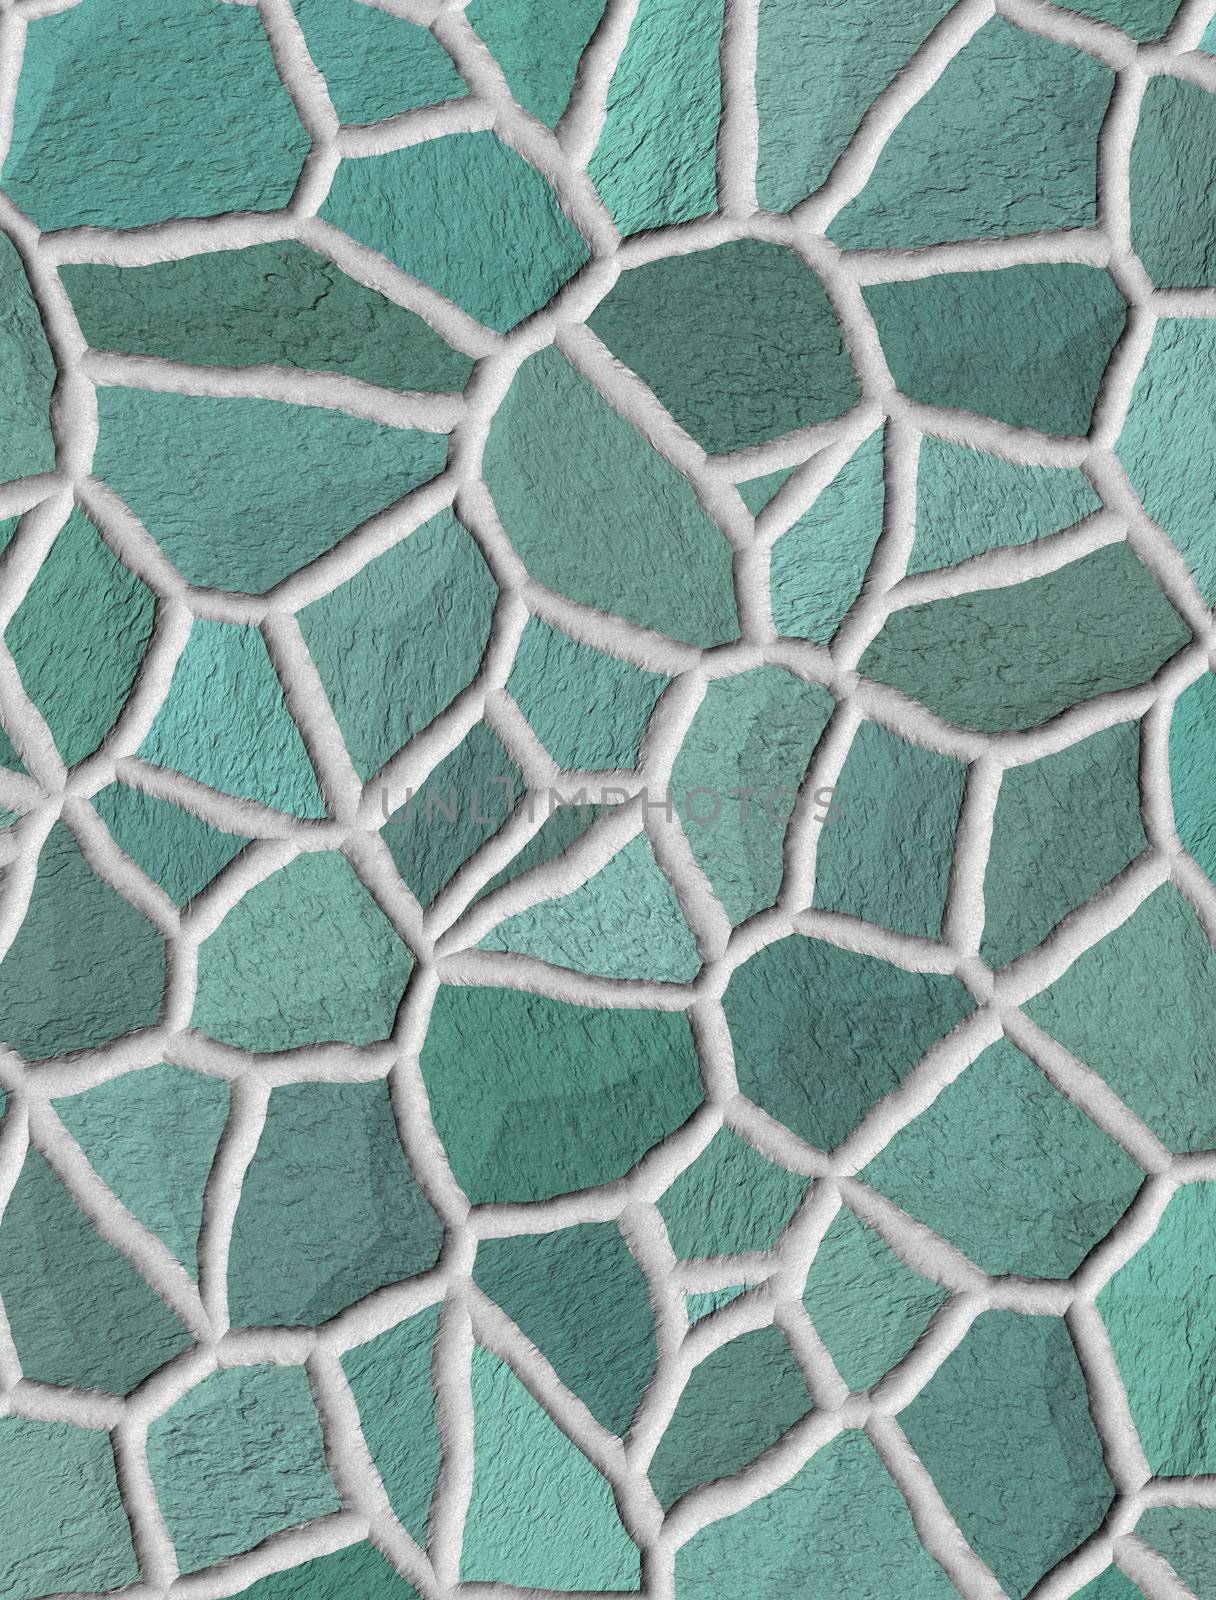 Marble Mosaic texture